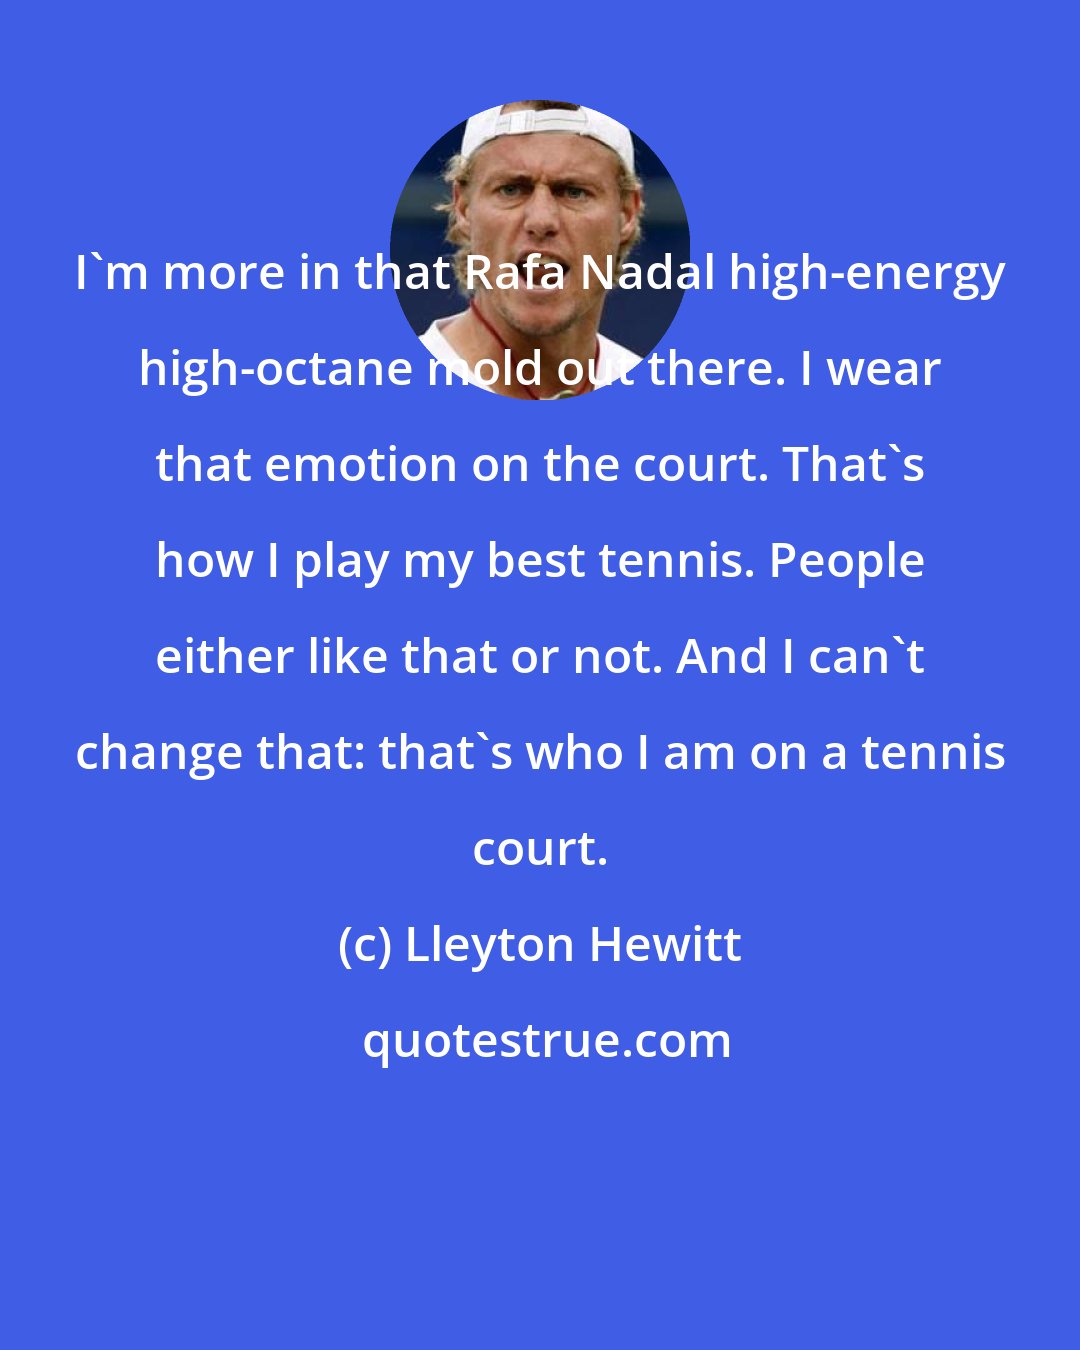 Lleyton Hewitt: I'm more in that Rafa Nadal high-energy high-octane mold out there. I wear that emotion on the court. That's how I play my best tennis. People either like that or not. And I can't change that: that's who I am on a tennis court.